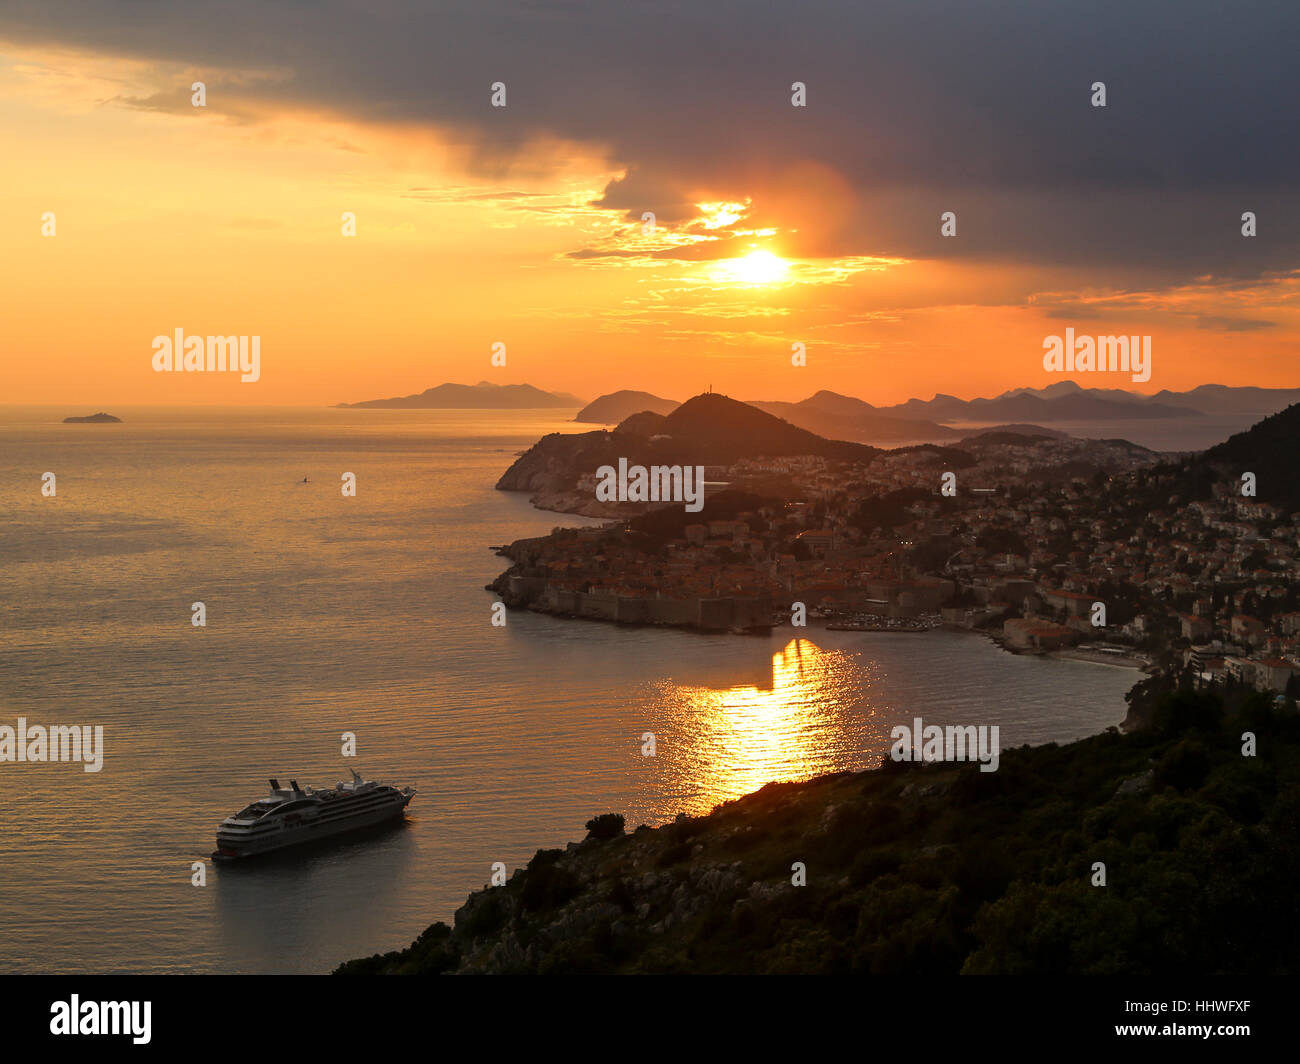 Dubrovnik at sunset with a cruiser ship Stock Photo